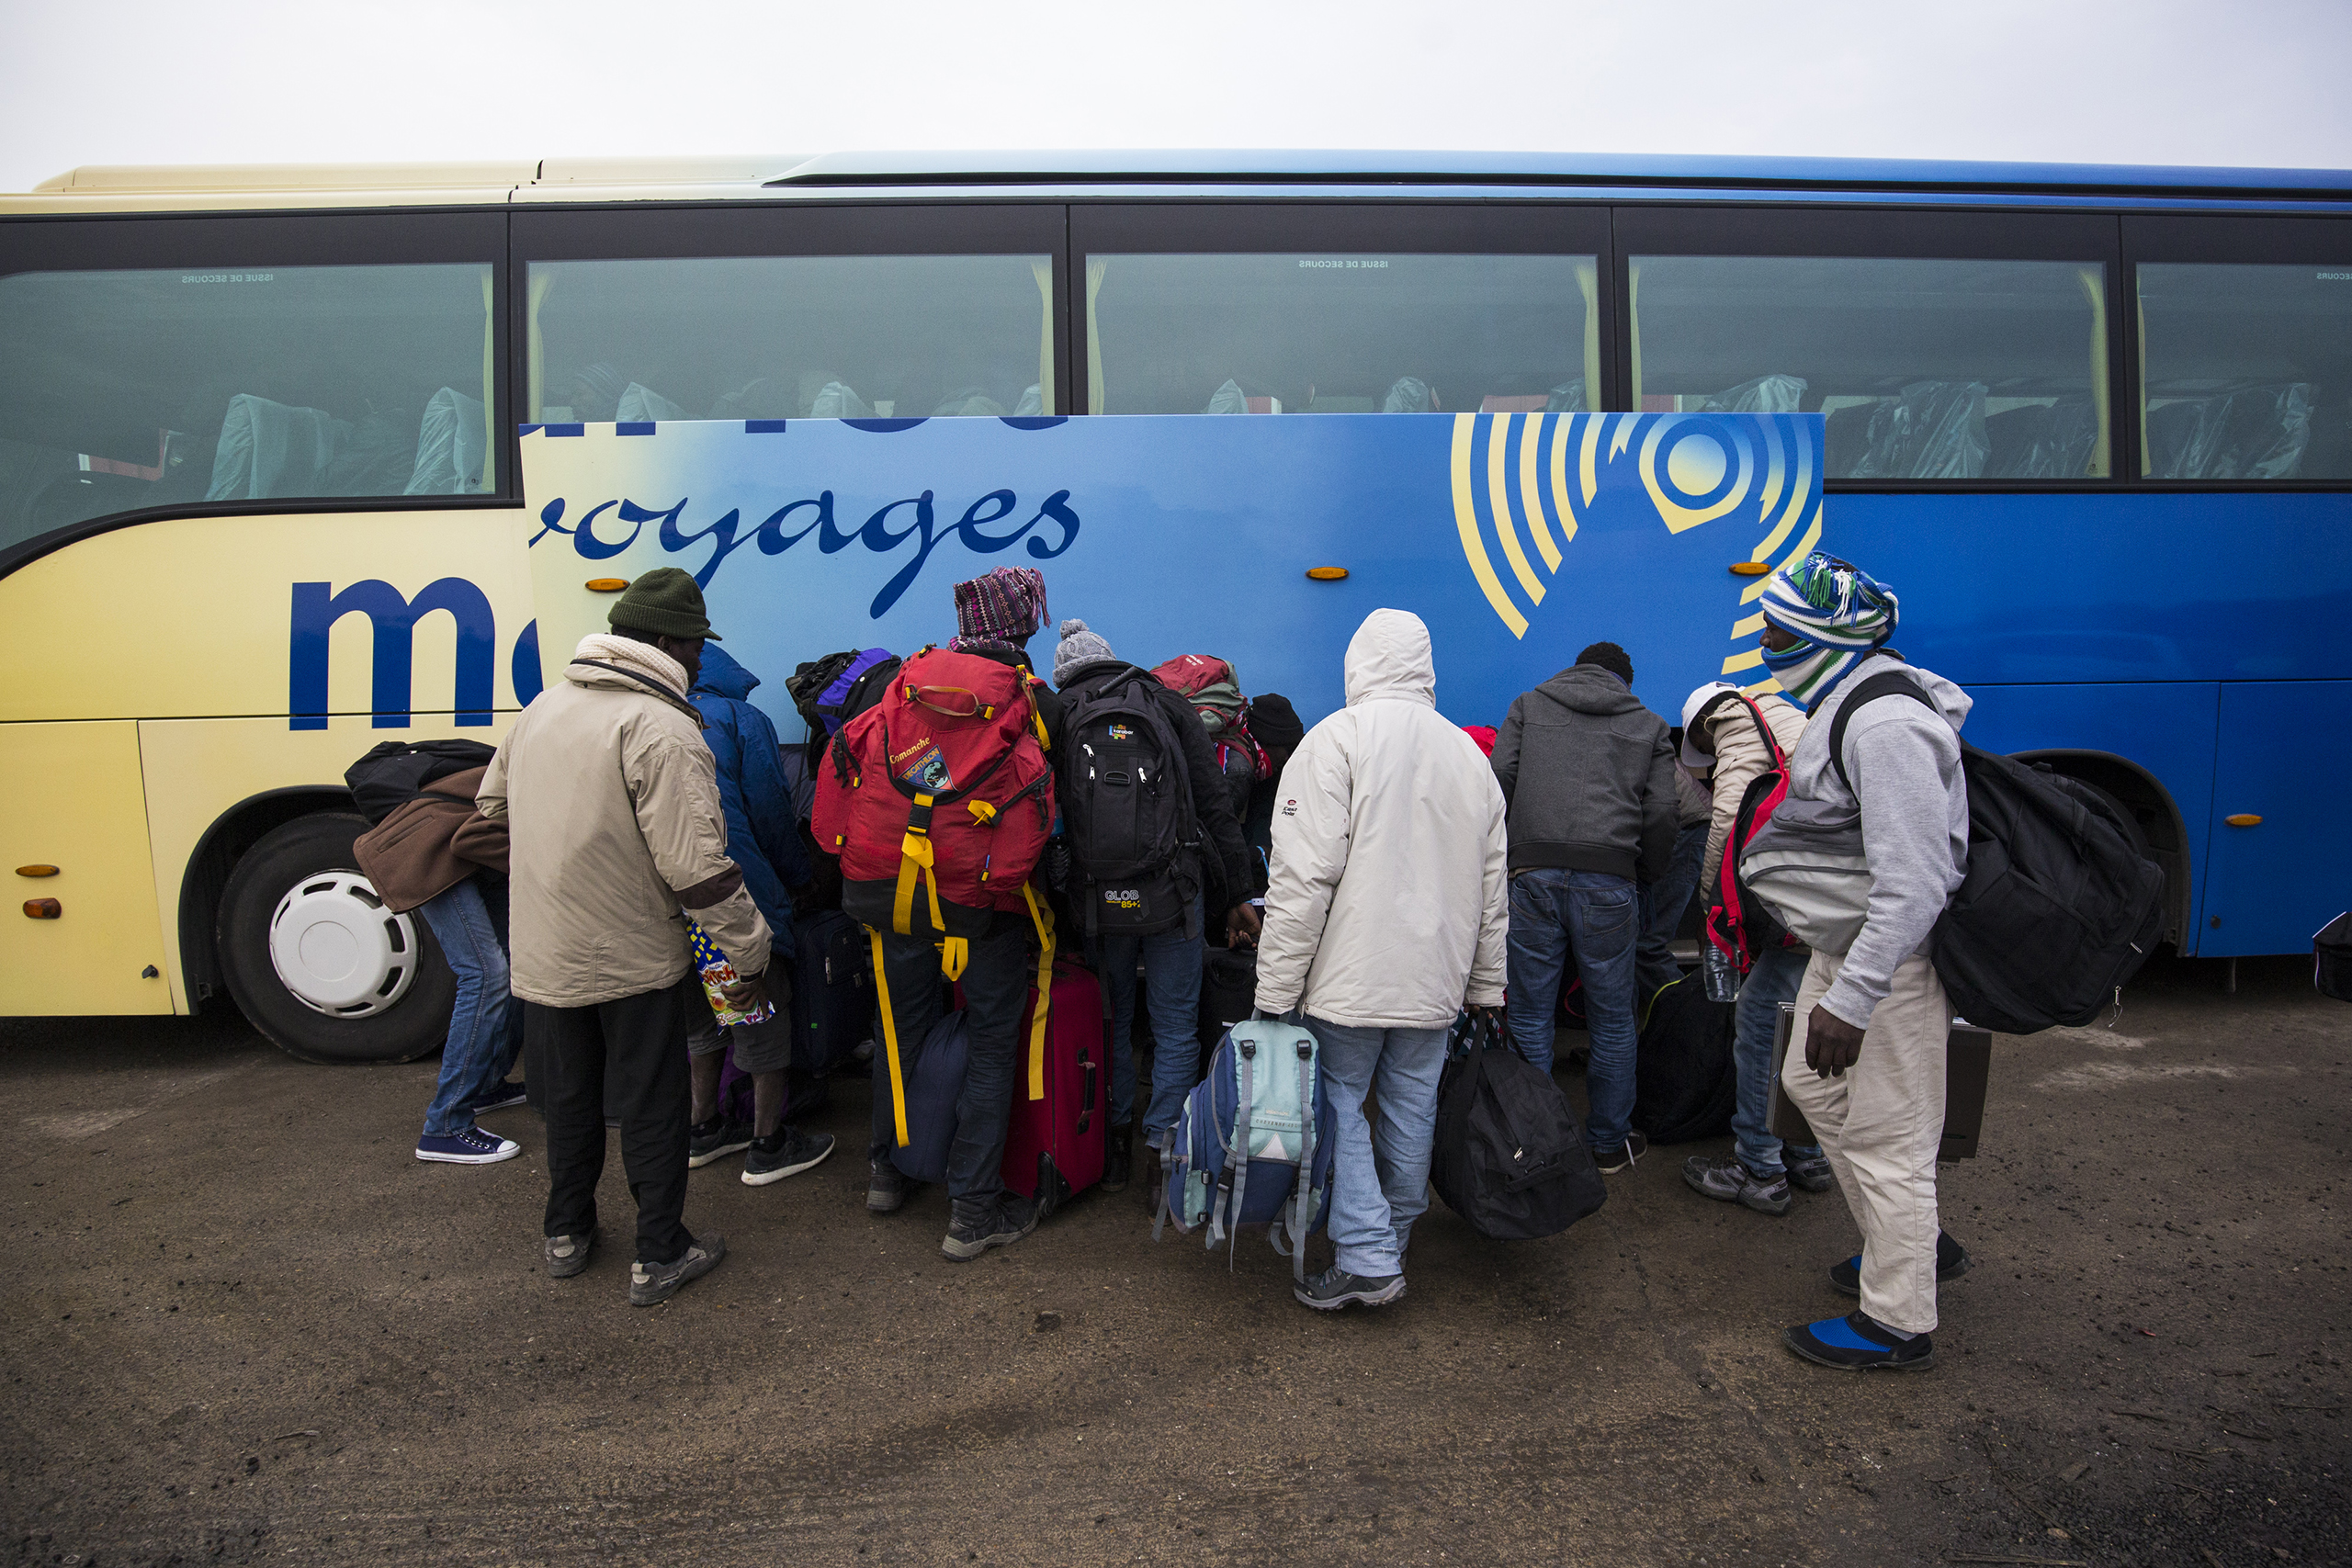 Migrants board buses outside the  Jungle  migrant camp dismantled this week by authorities, headed to refugee centers around France, at a reception point in Calais on Oct. 24, 2016.